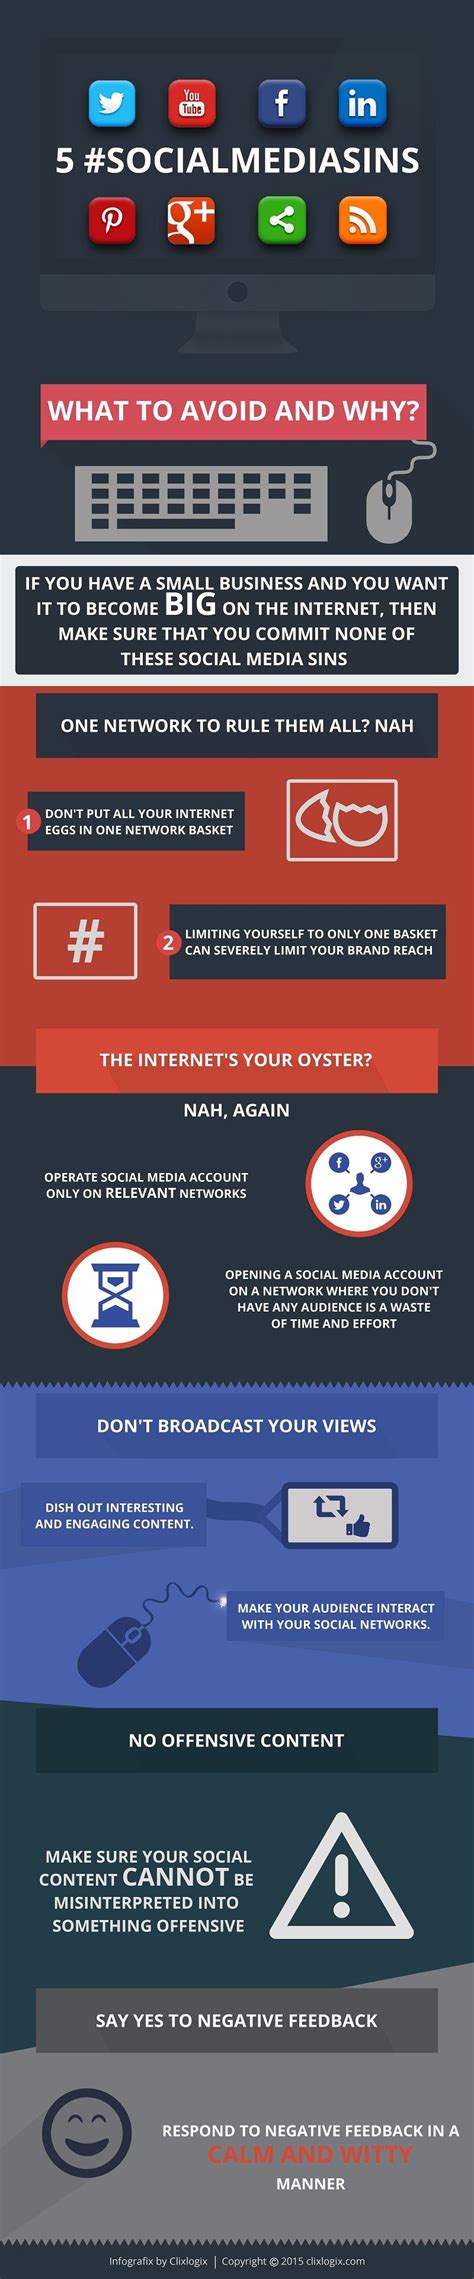 social media sins what to avoid infographic visualistan